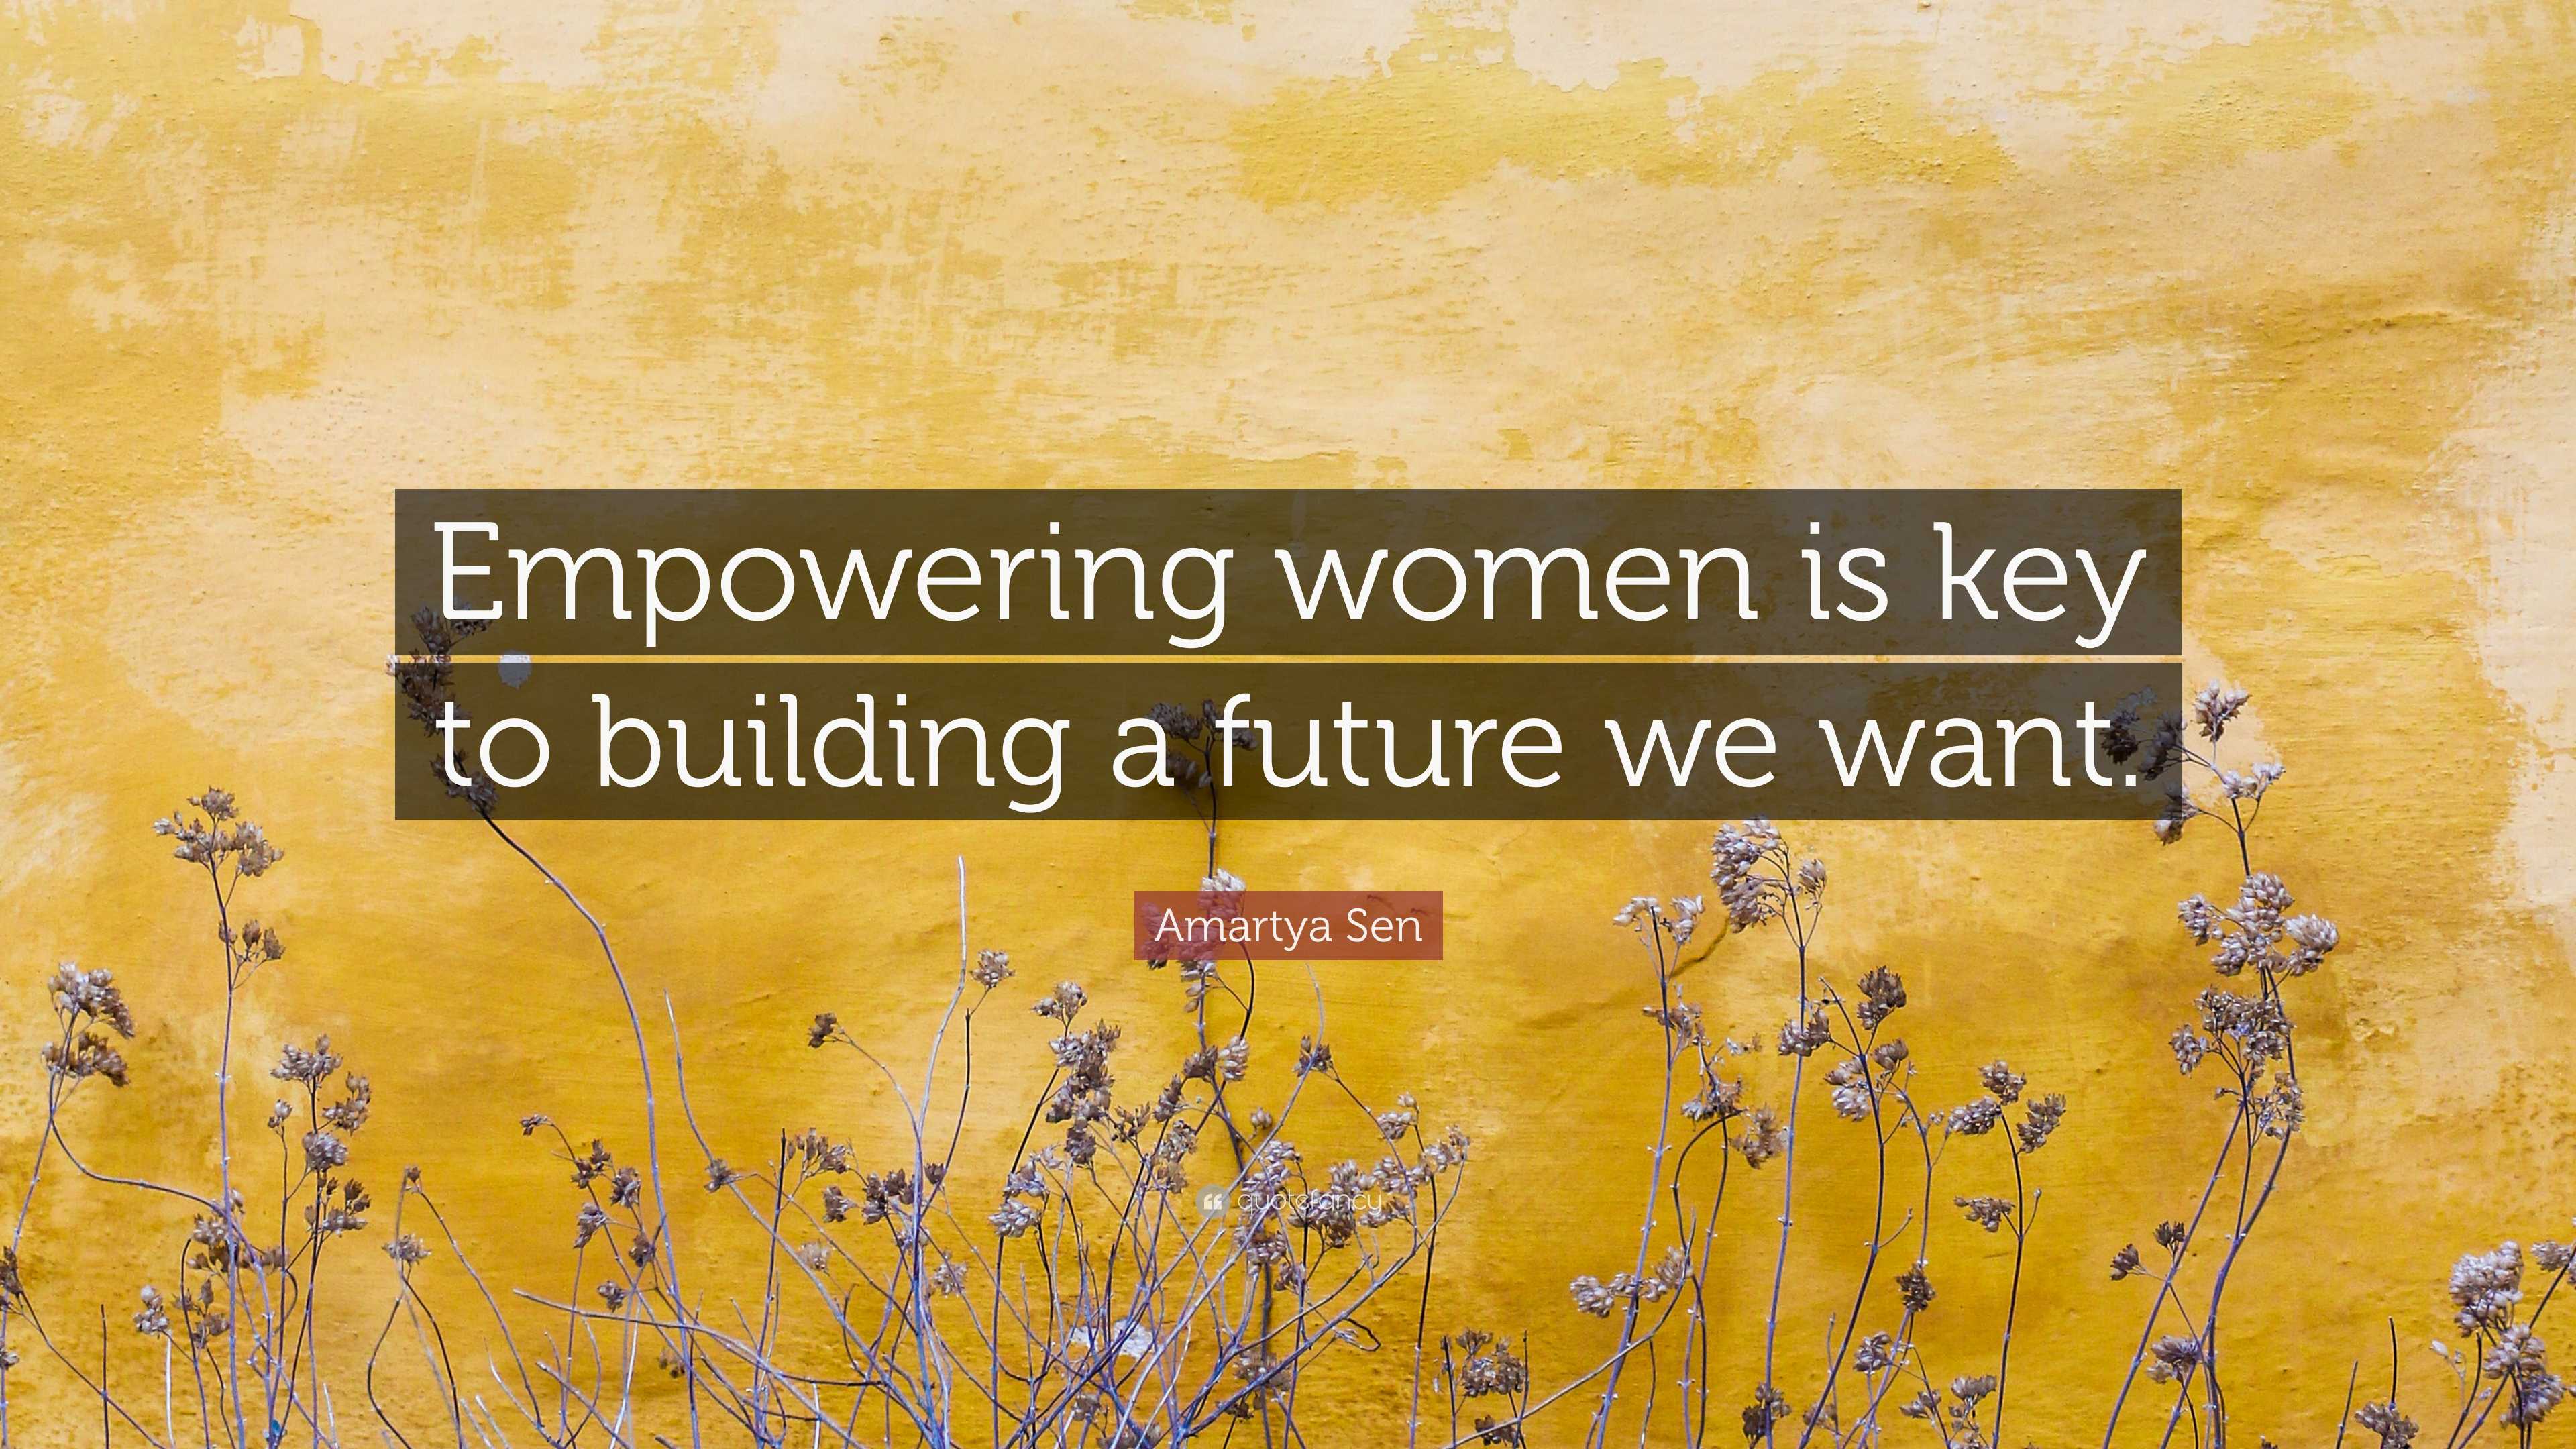 Amartya Sen Quote: “Empowering women is key to building a future we want.”